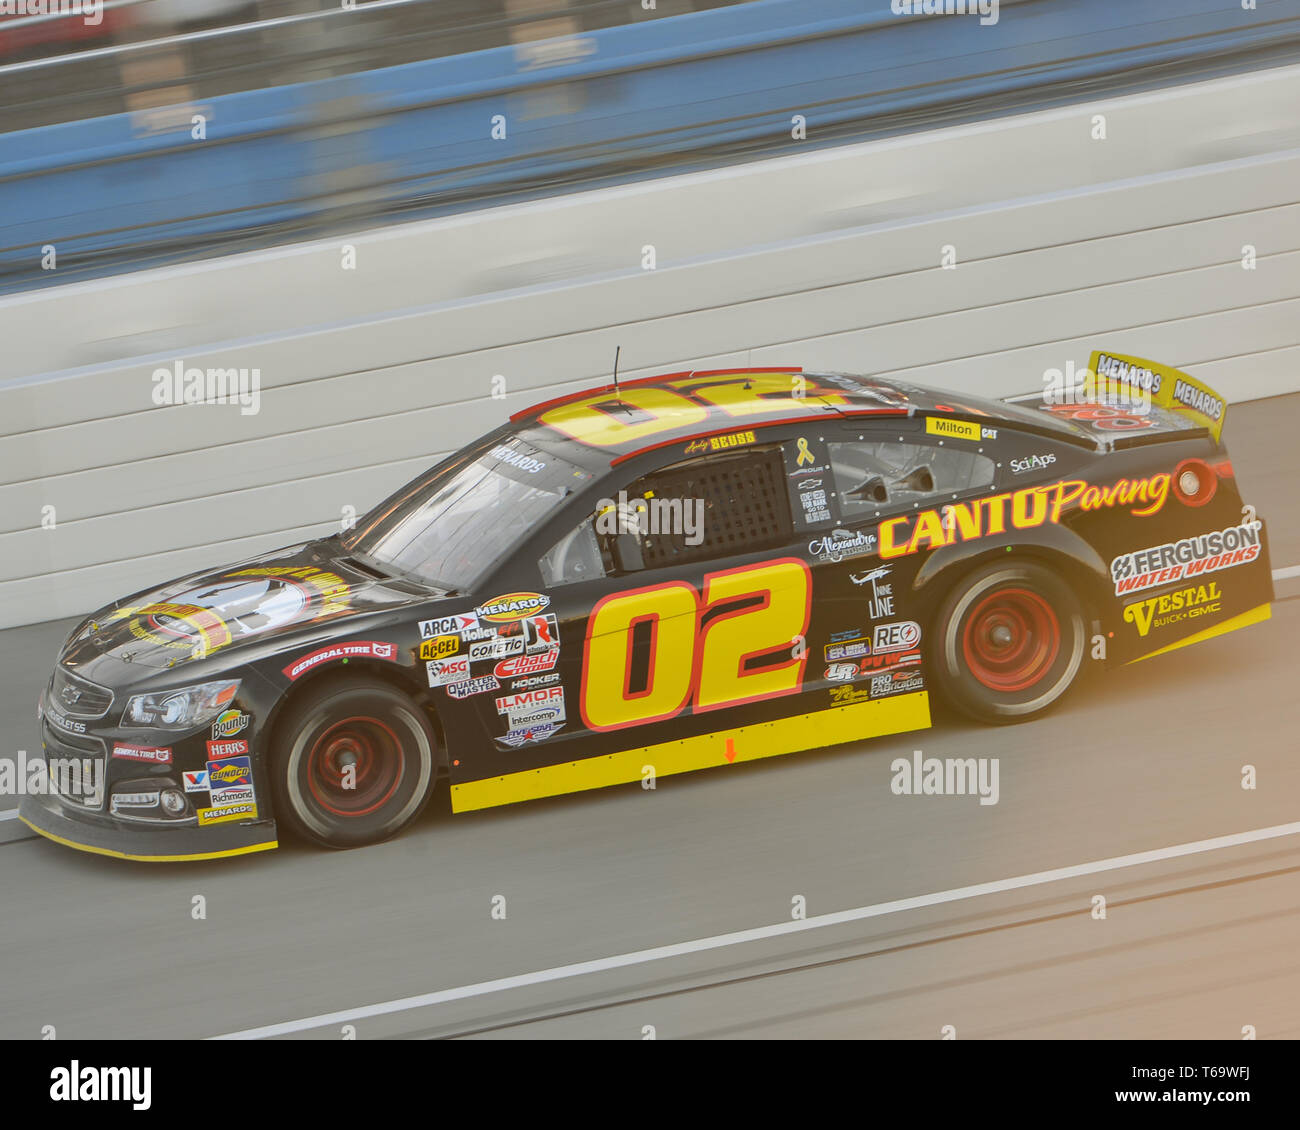 Lincoln, AL, USA. 26th Apr, 2019. The Robert B. Our Company-Canto Paving Chevrolet (02), driven by Andy Seuss, during the General Tire 200 at Talladega Super Speedway in Lincoln, AL. Kevin Langley/Sports South Media/CSM/Alamy Live News Stock Photo